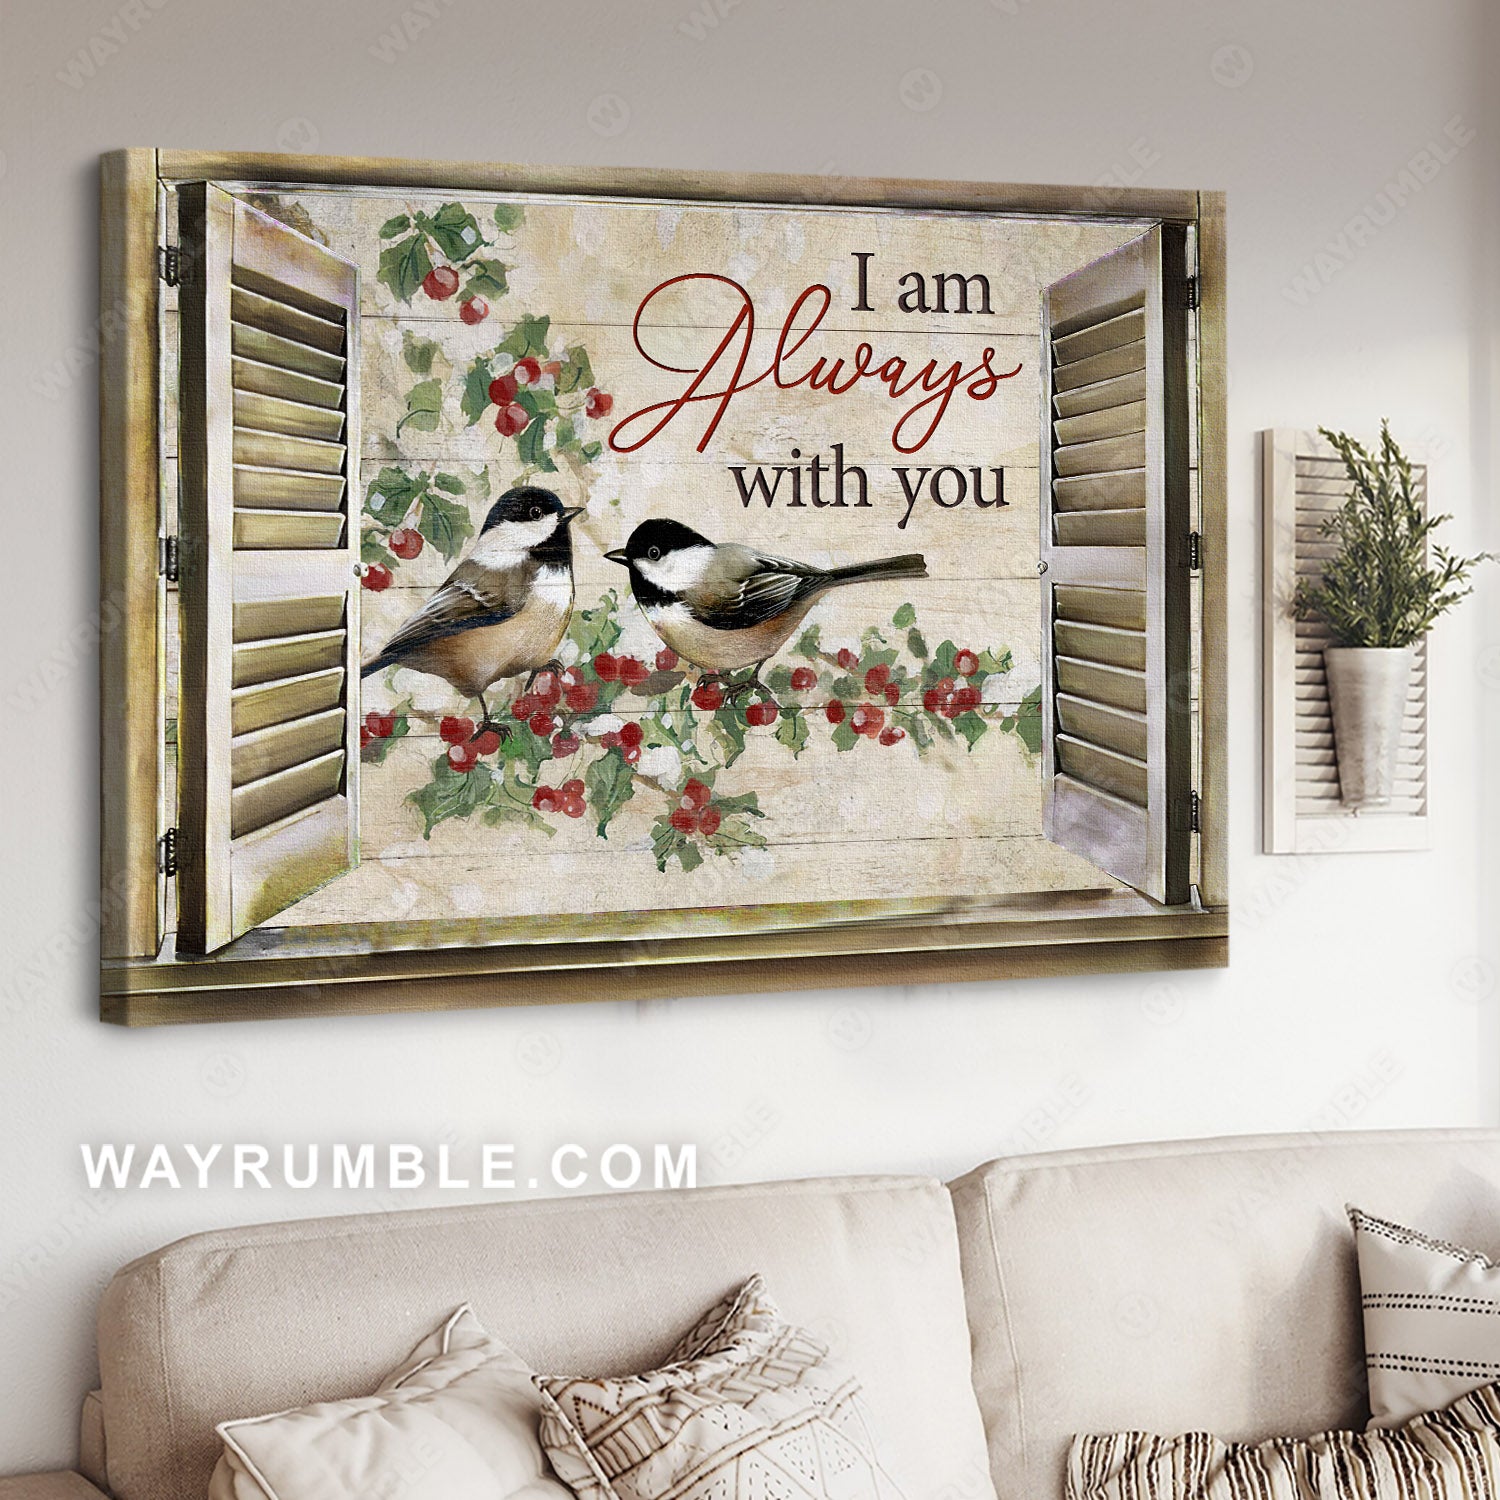 Bird couple, Tit bird, Wooden windows, Inspirational quote, I am always with you - Jesus Landscape Canvas Prints, Home Decor Wall Art